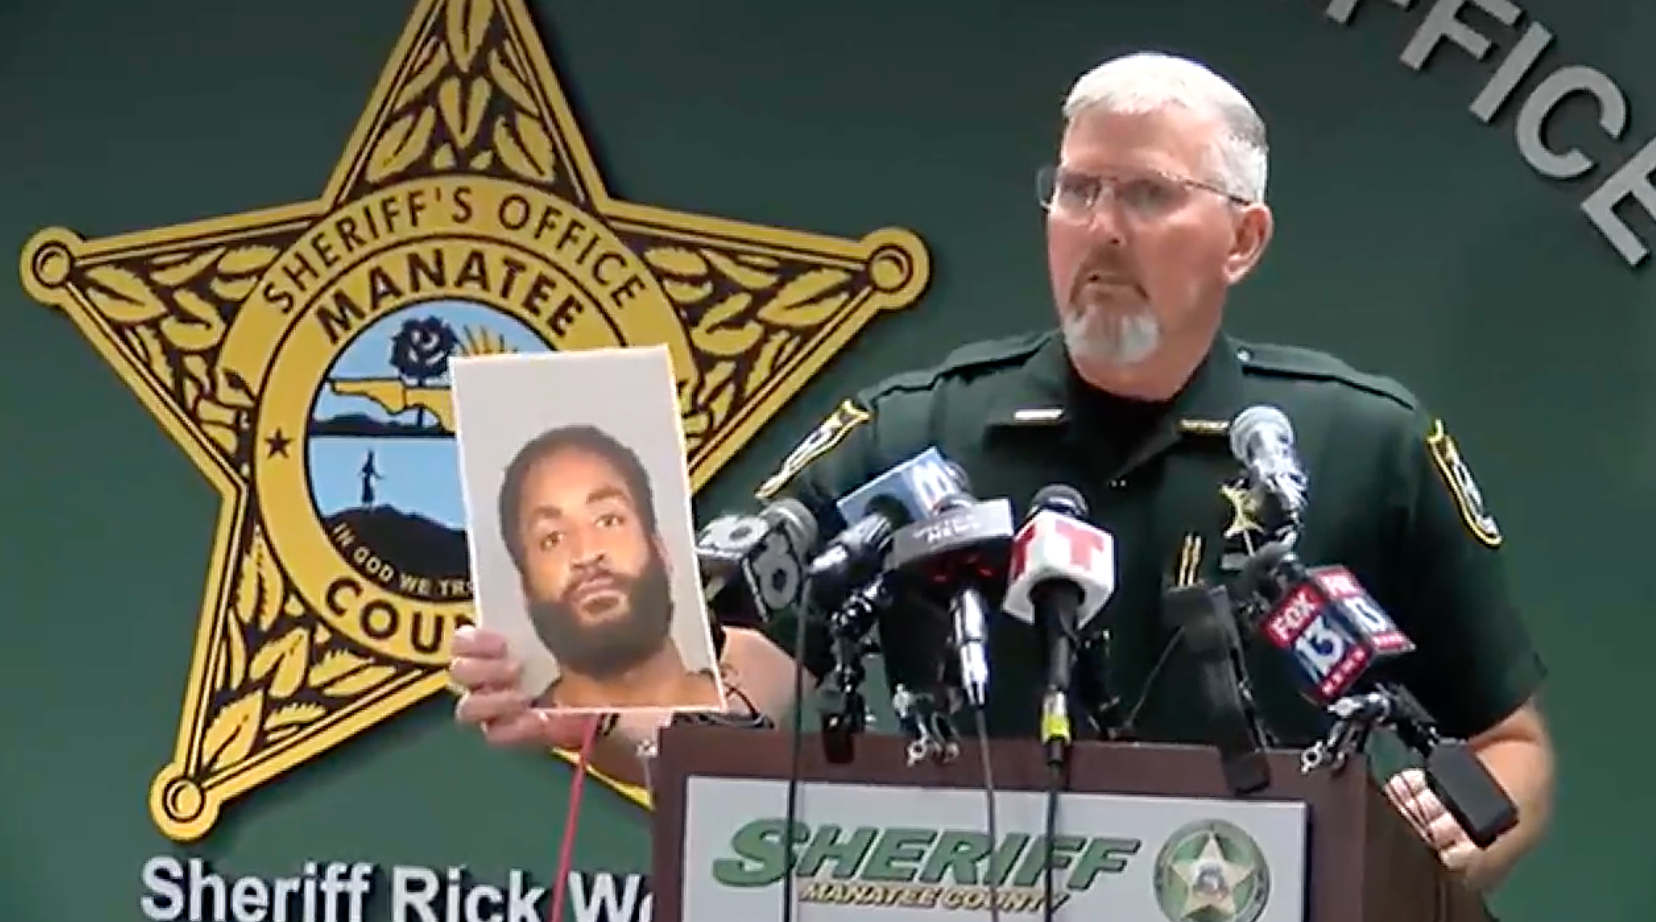 Manatee County Sheriff Rick Wells holds a booking photo of Javontee Brice. While police do not yet have a motive, Wells said Brice’s family has been helpful to investigators.